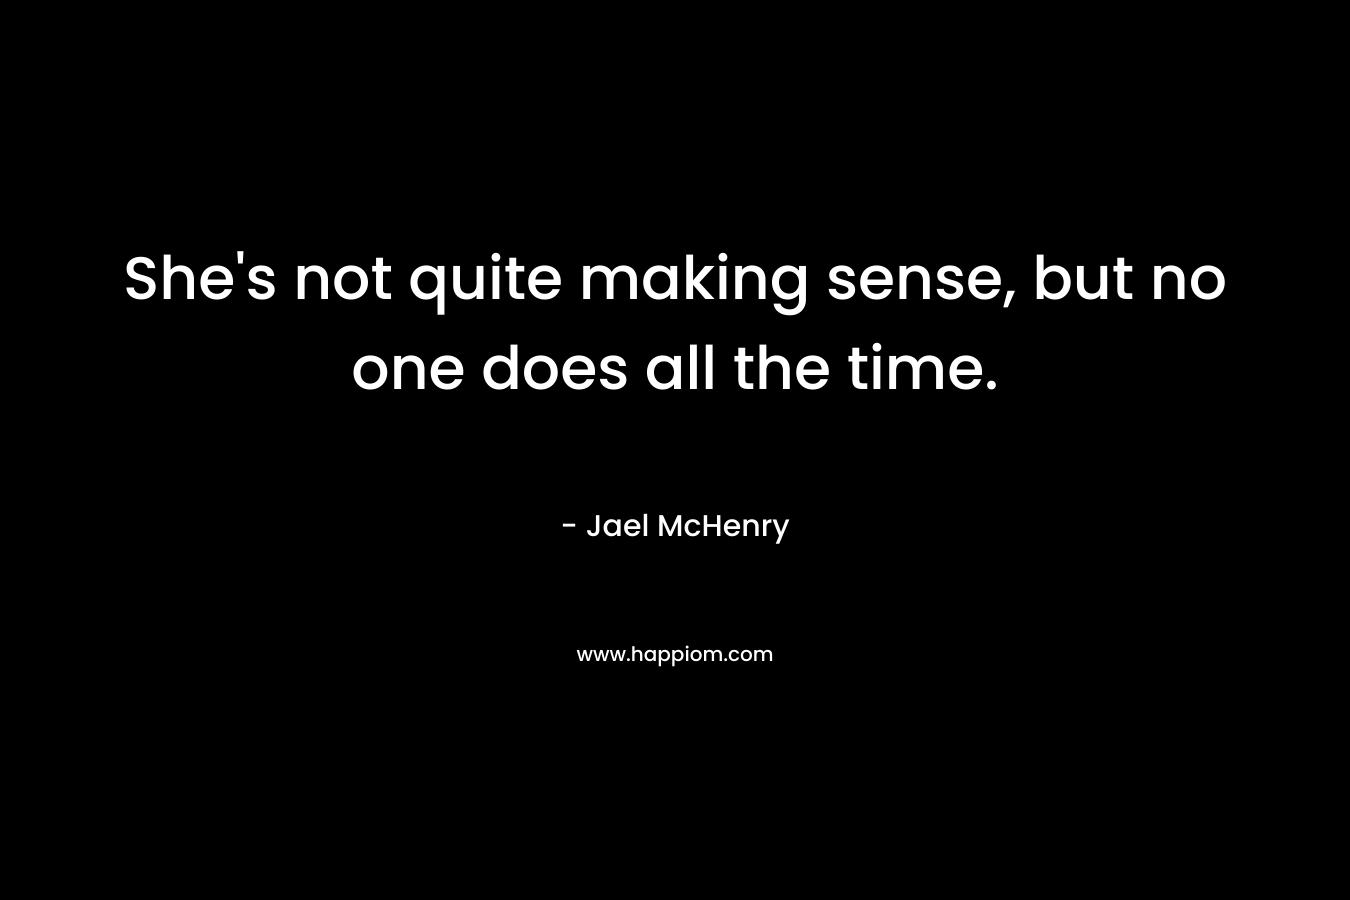 She’s not quite making sense, but no one does all the time. – Jael McHenry